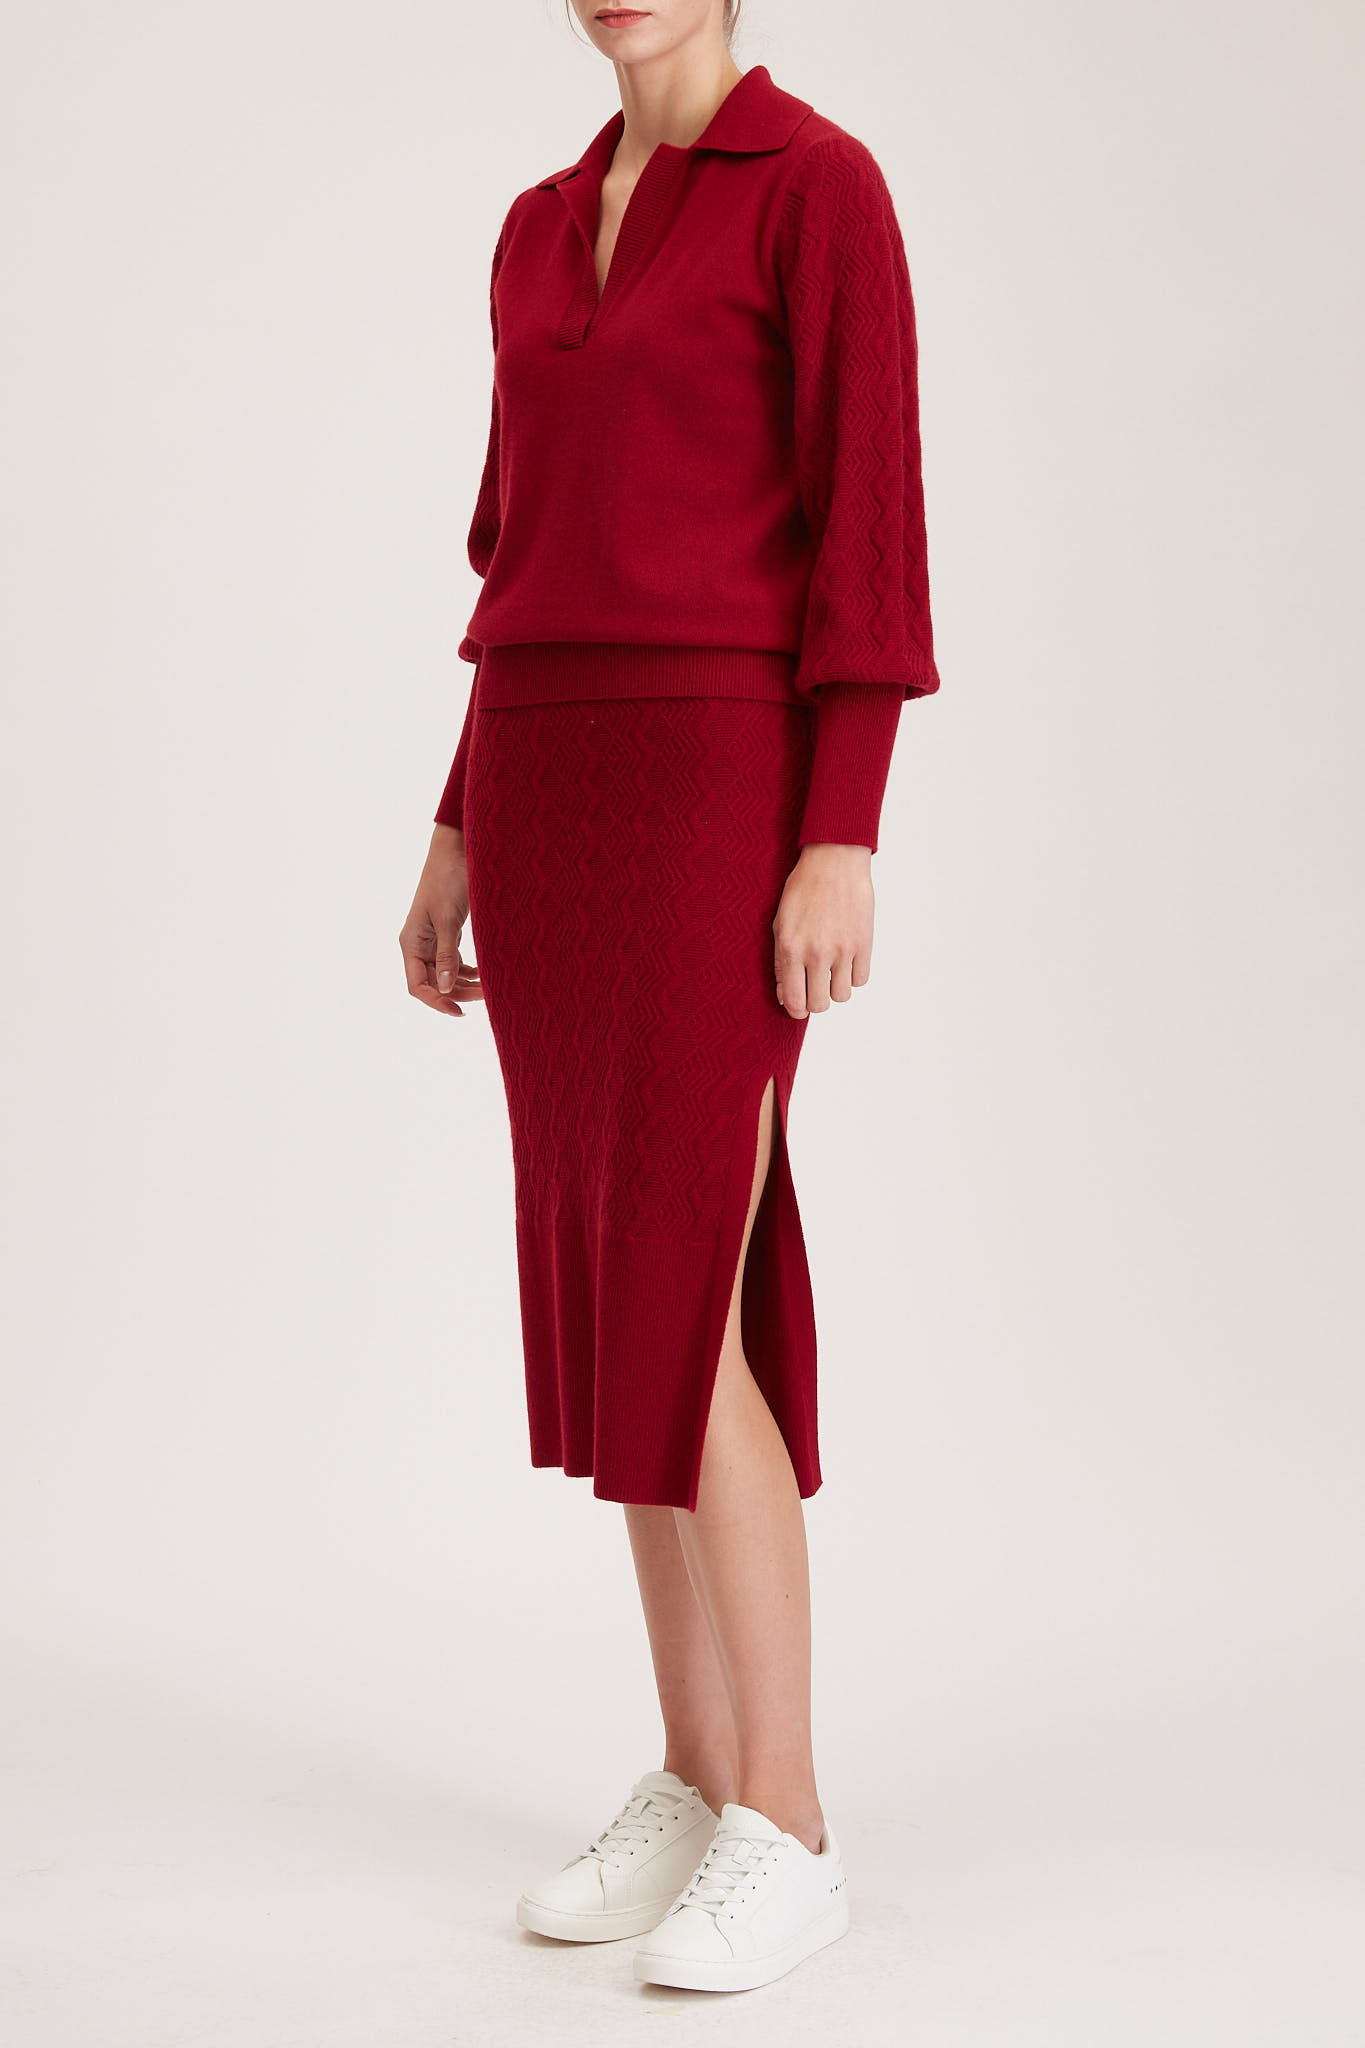 Rouen Knit Skirt – Knitted pencil skirt with side slit in red wine cashmere